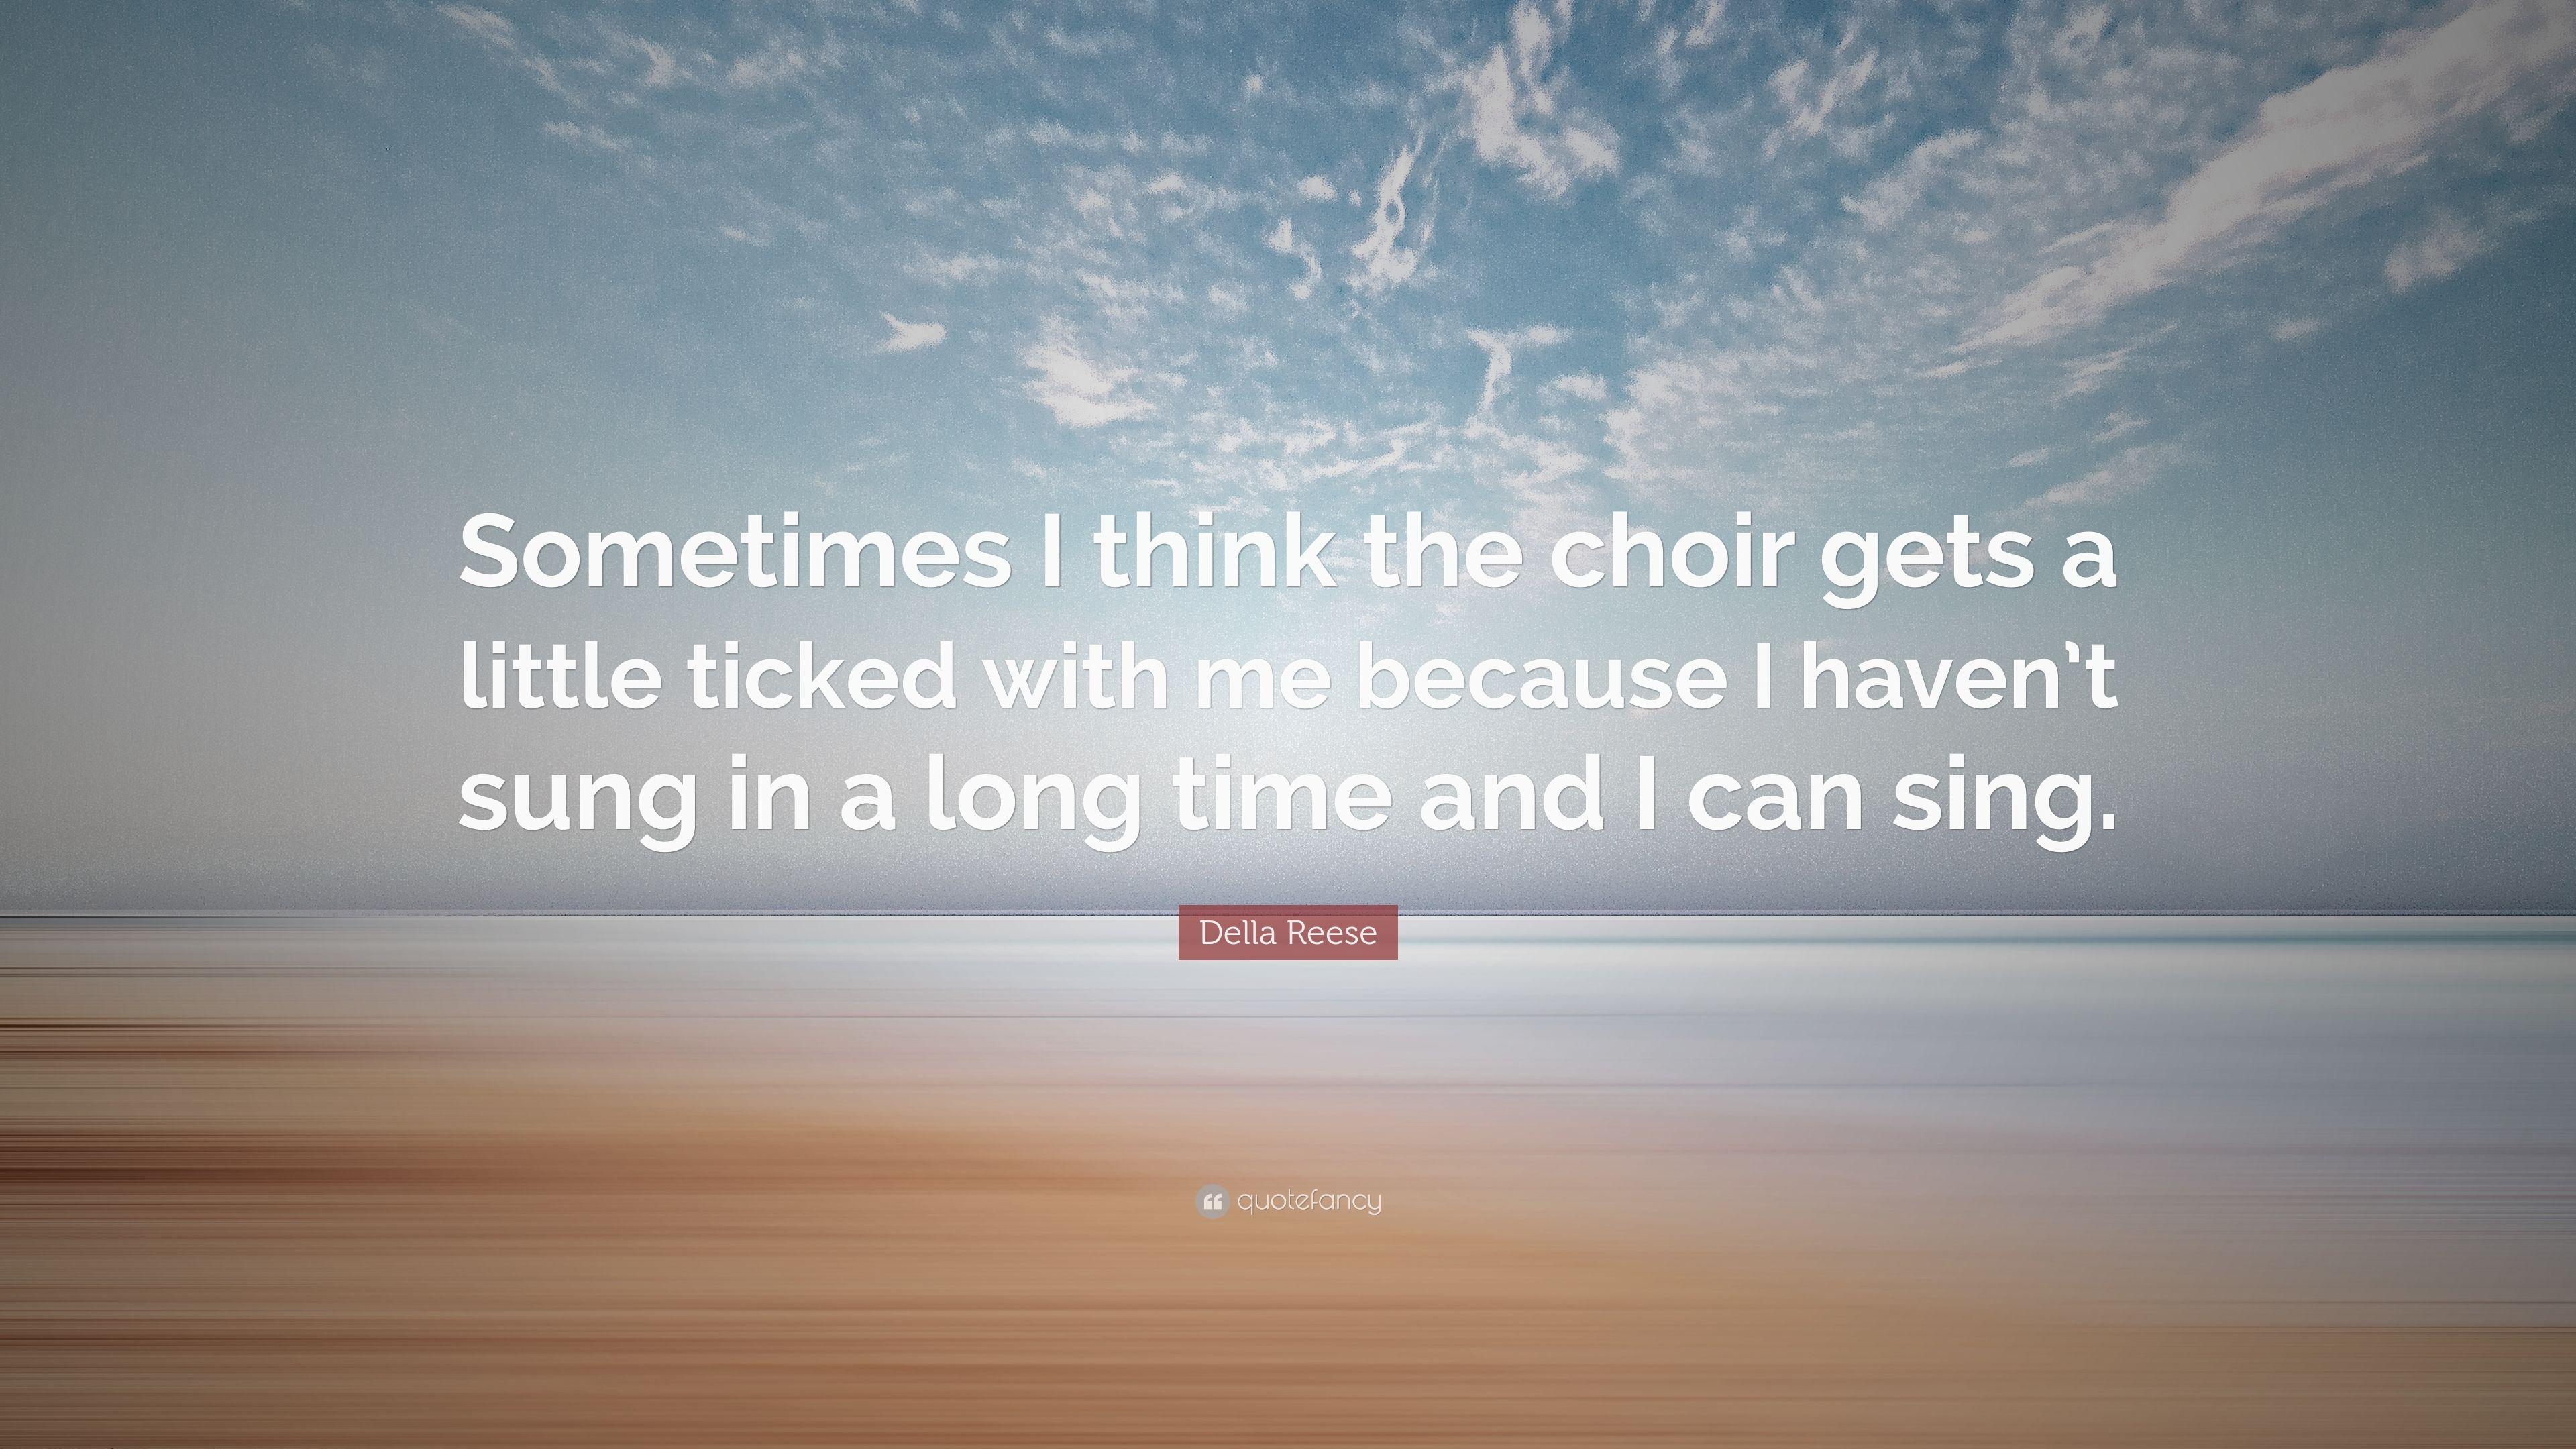 Della Reese Quote: “Sometimes I think the choir gets a little